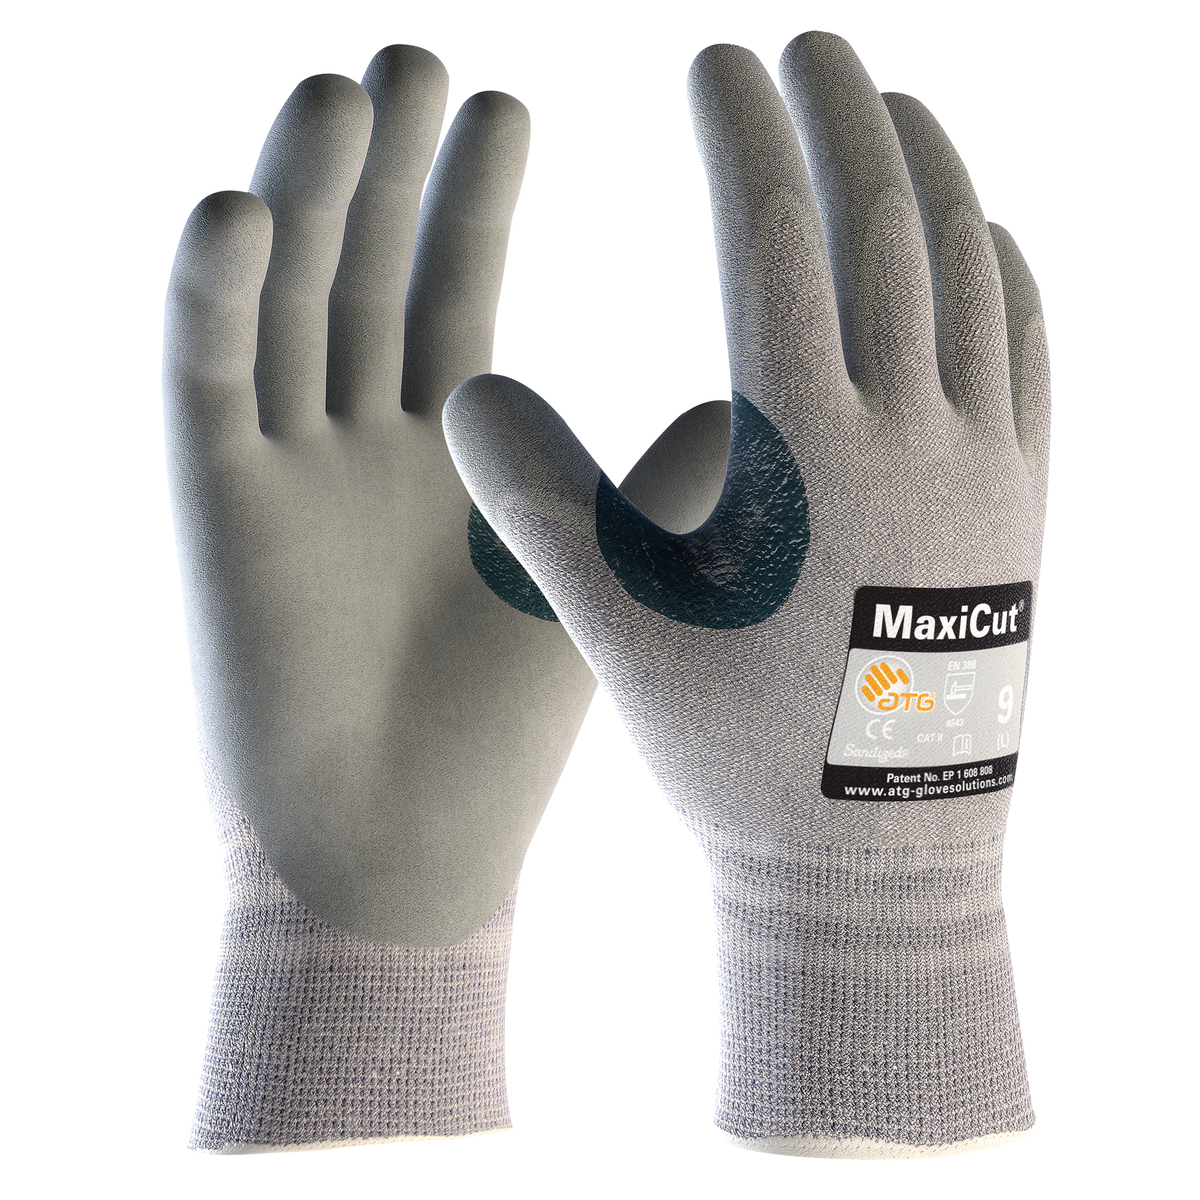 PIP® 2X MaxiCut® 13 Gauge Dyneema® And Engineered Yarn And Nylon Cut Resistant Gloves With Micro-Foam Nitrile Coating